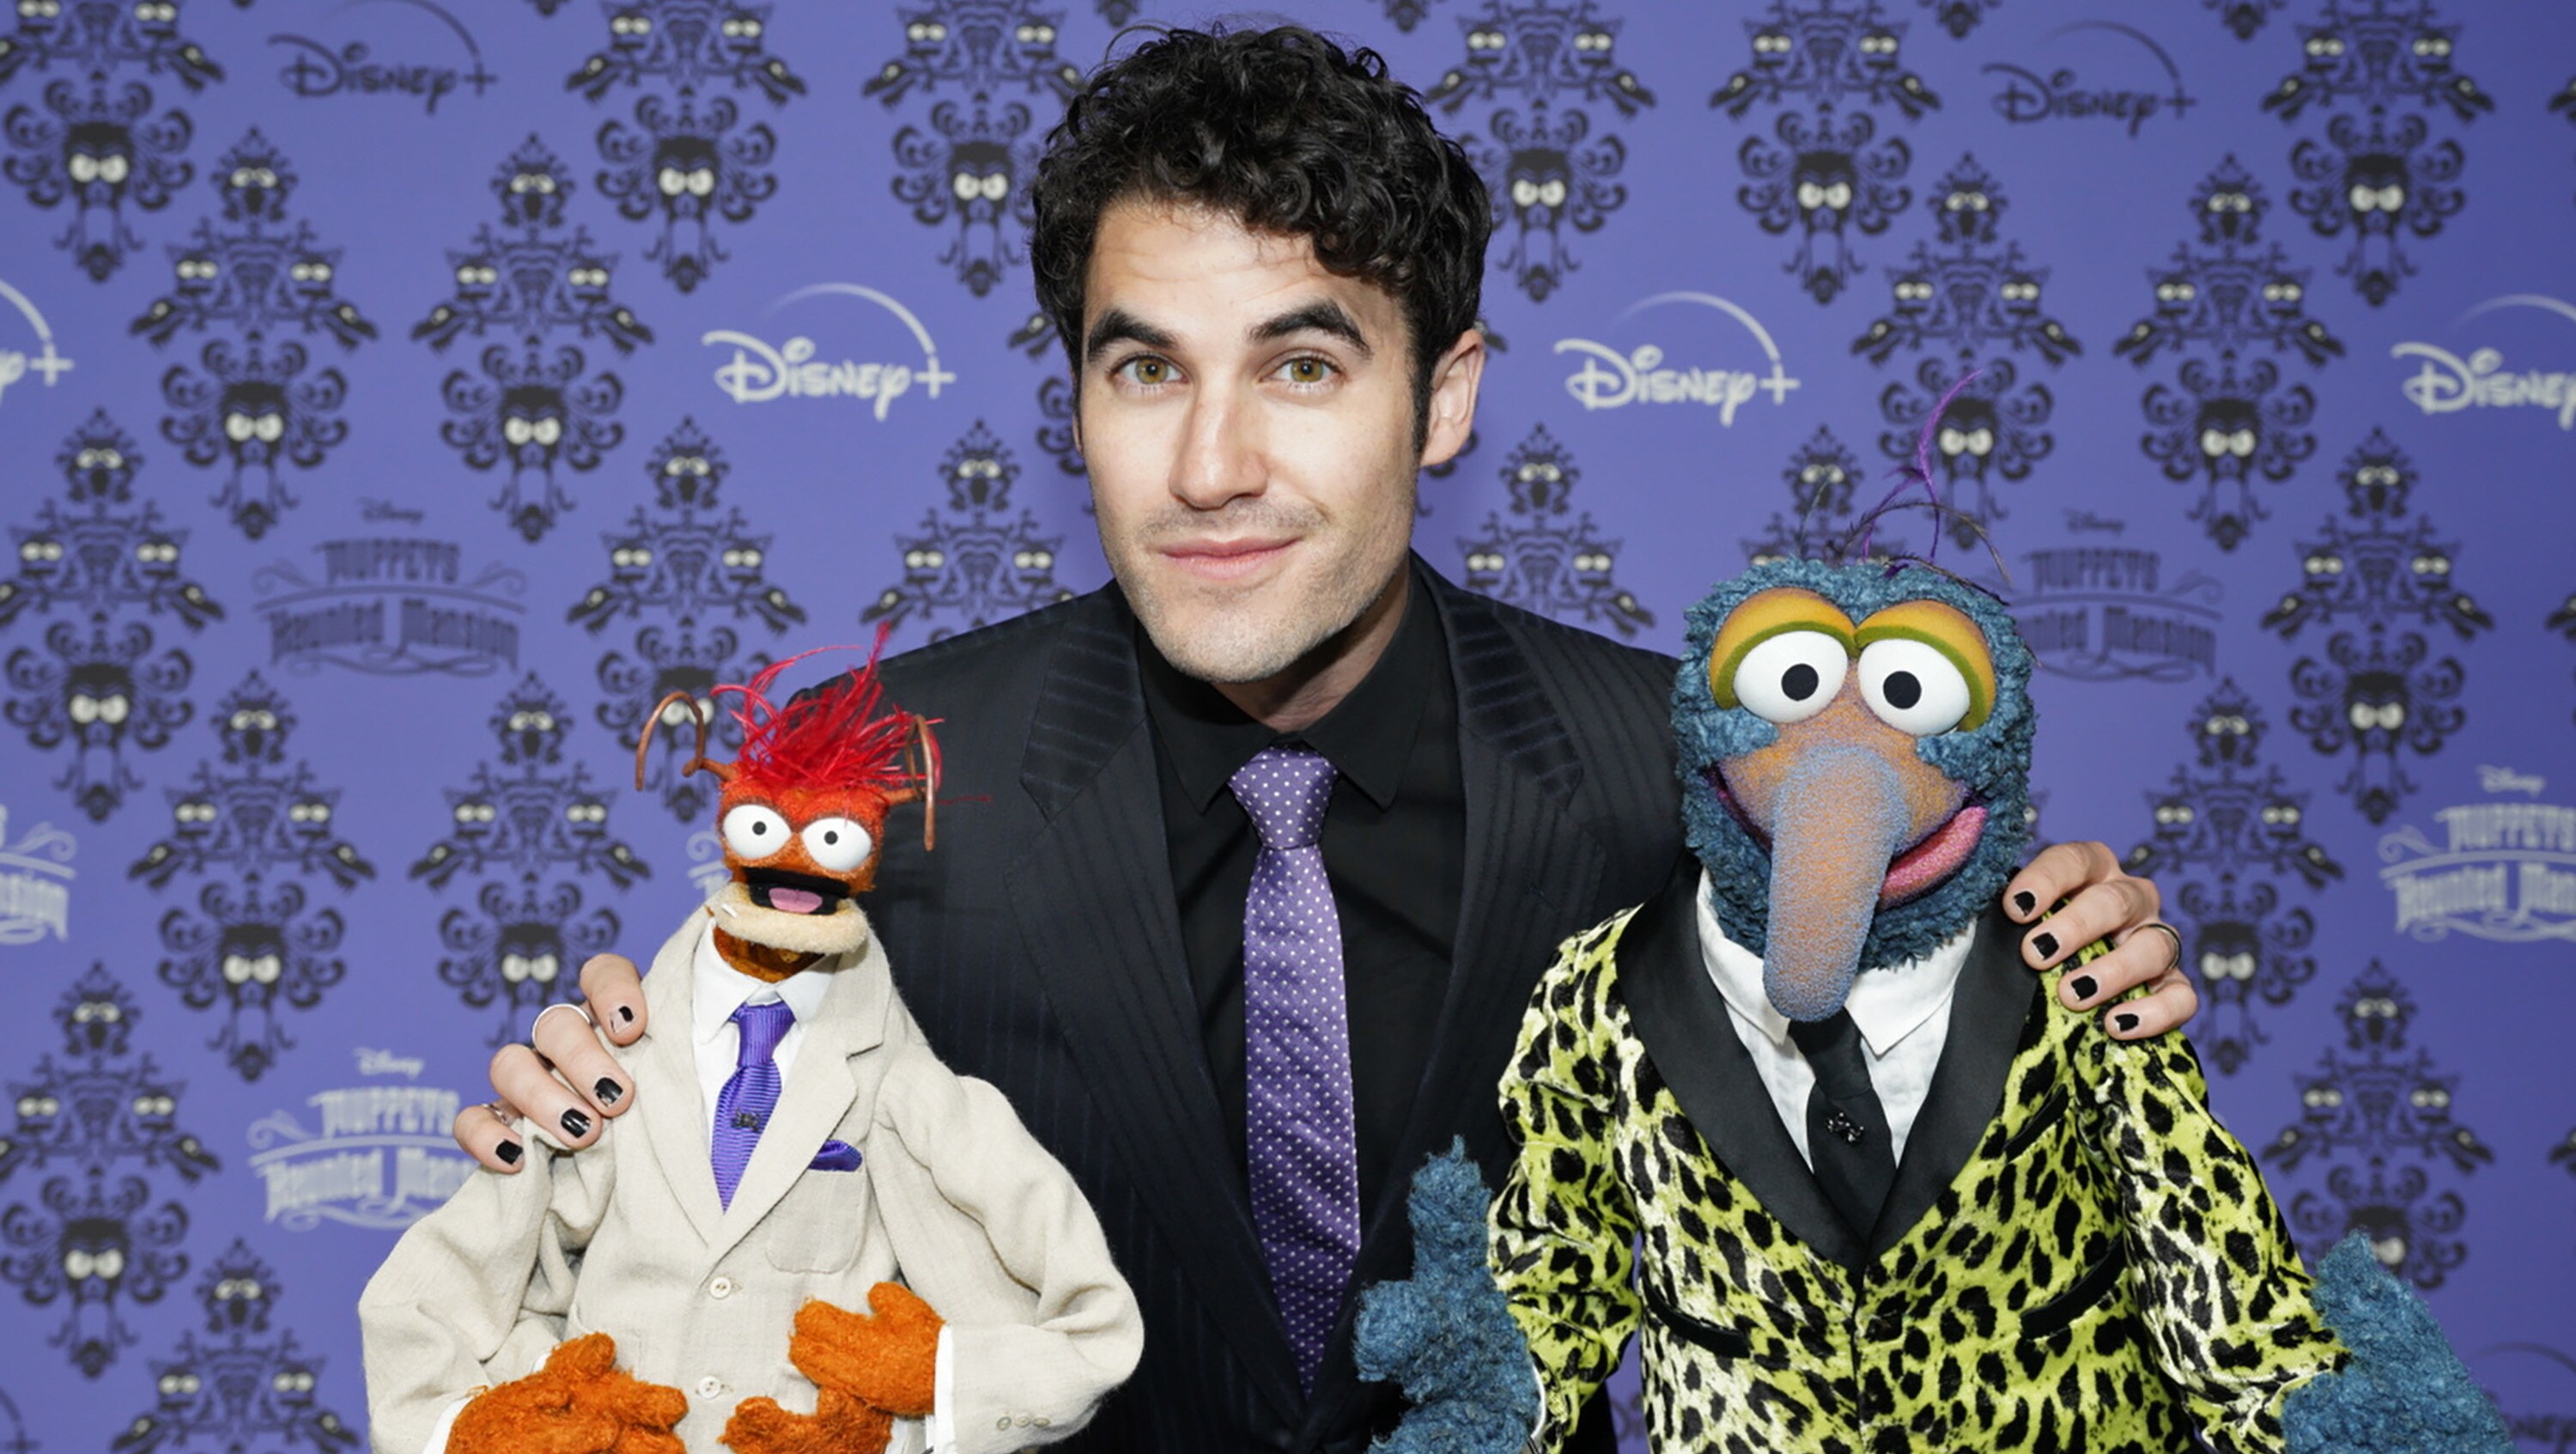 MUPPETS HAUNTED MANSION - Stars of The Muppets first-ever Halloween special "Muppets Haunted Mansion" attended the Drive-In Premiere Event at West Los Angeles College, Thursday, October 7. "Muppets Haunted Mansion" is available to stream Friday, October 8 on Disney+. (Disney/Jacqueline Jones) PEPE THE KING PRAWN, DARREN CRISS, GONZO